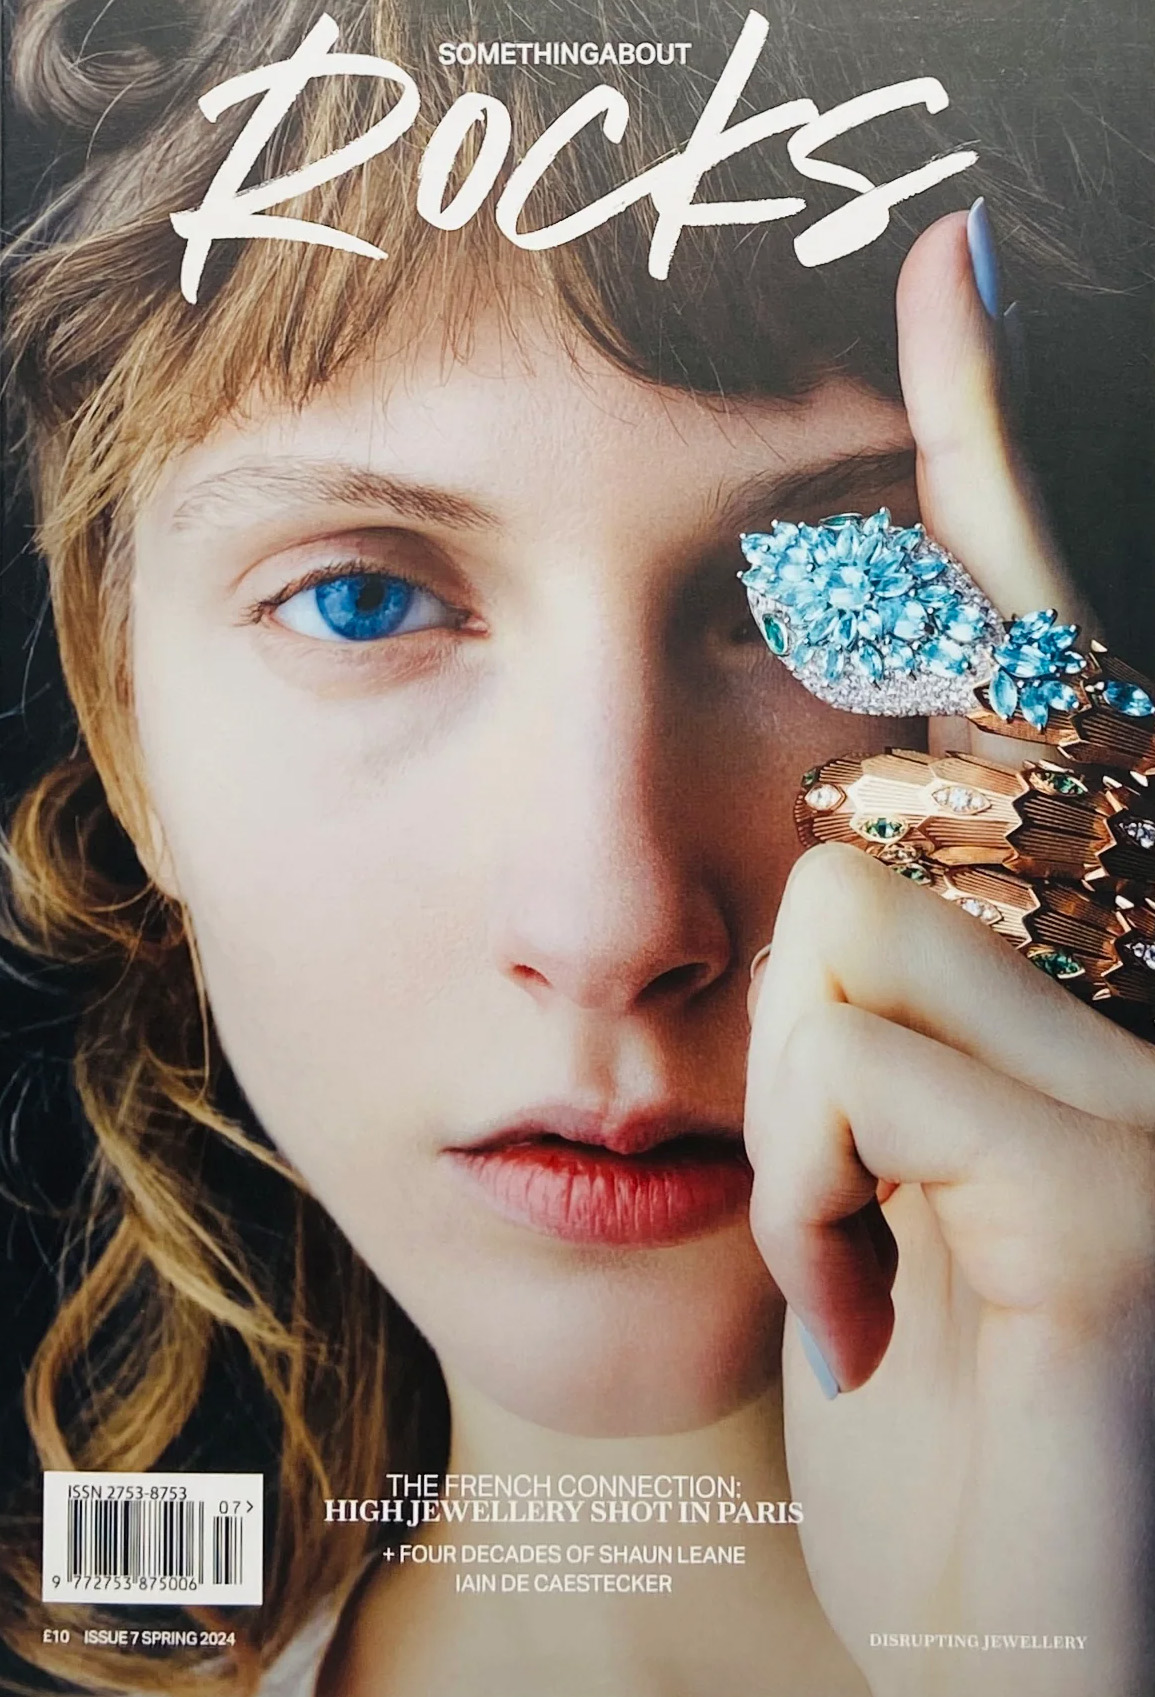 The French Connection: High Jewellery Shot In Paris